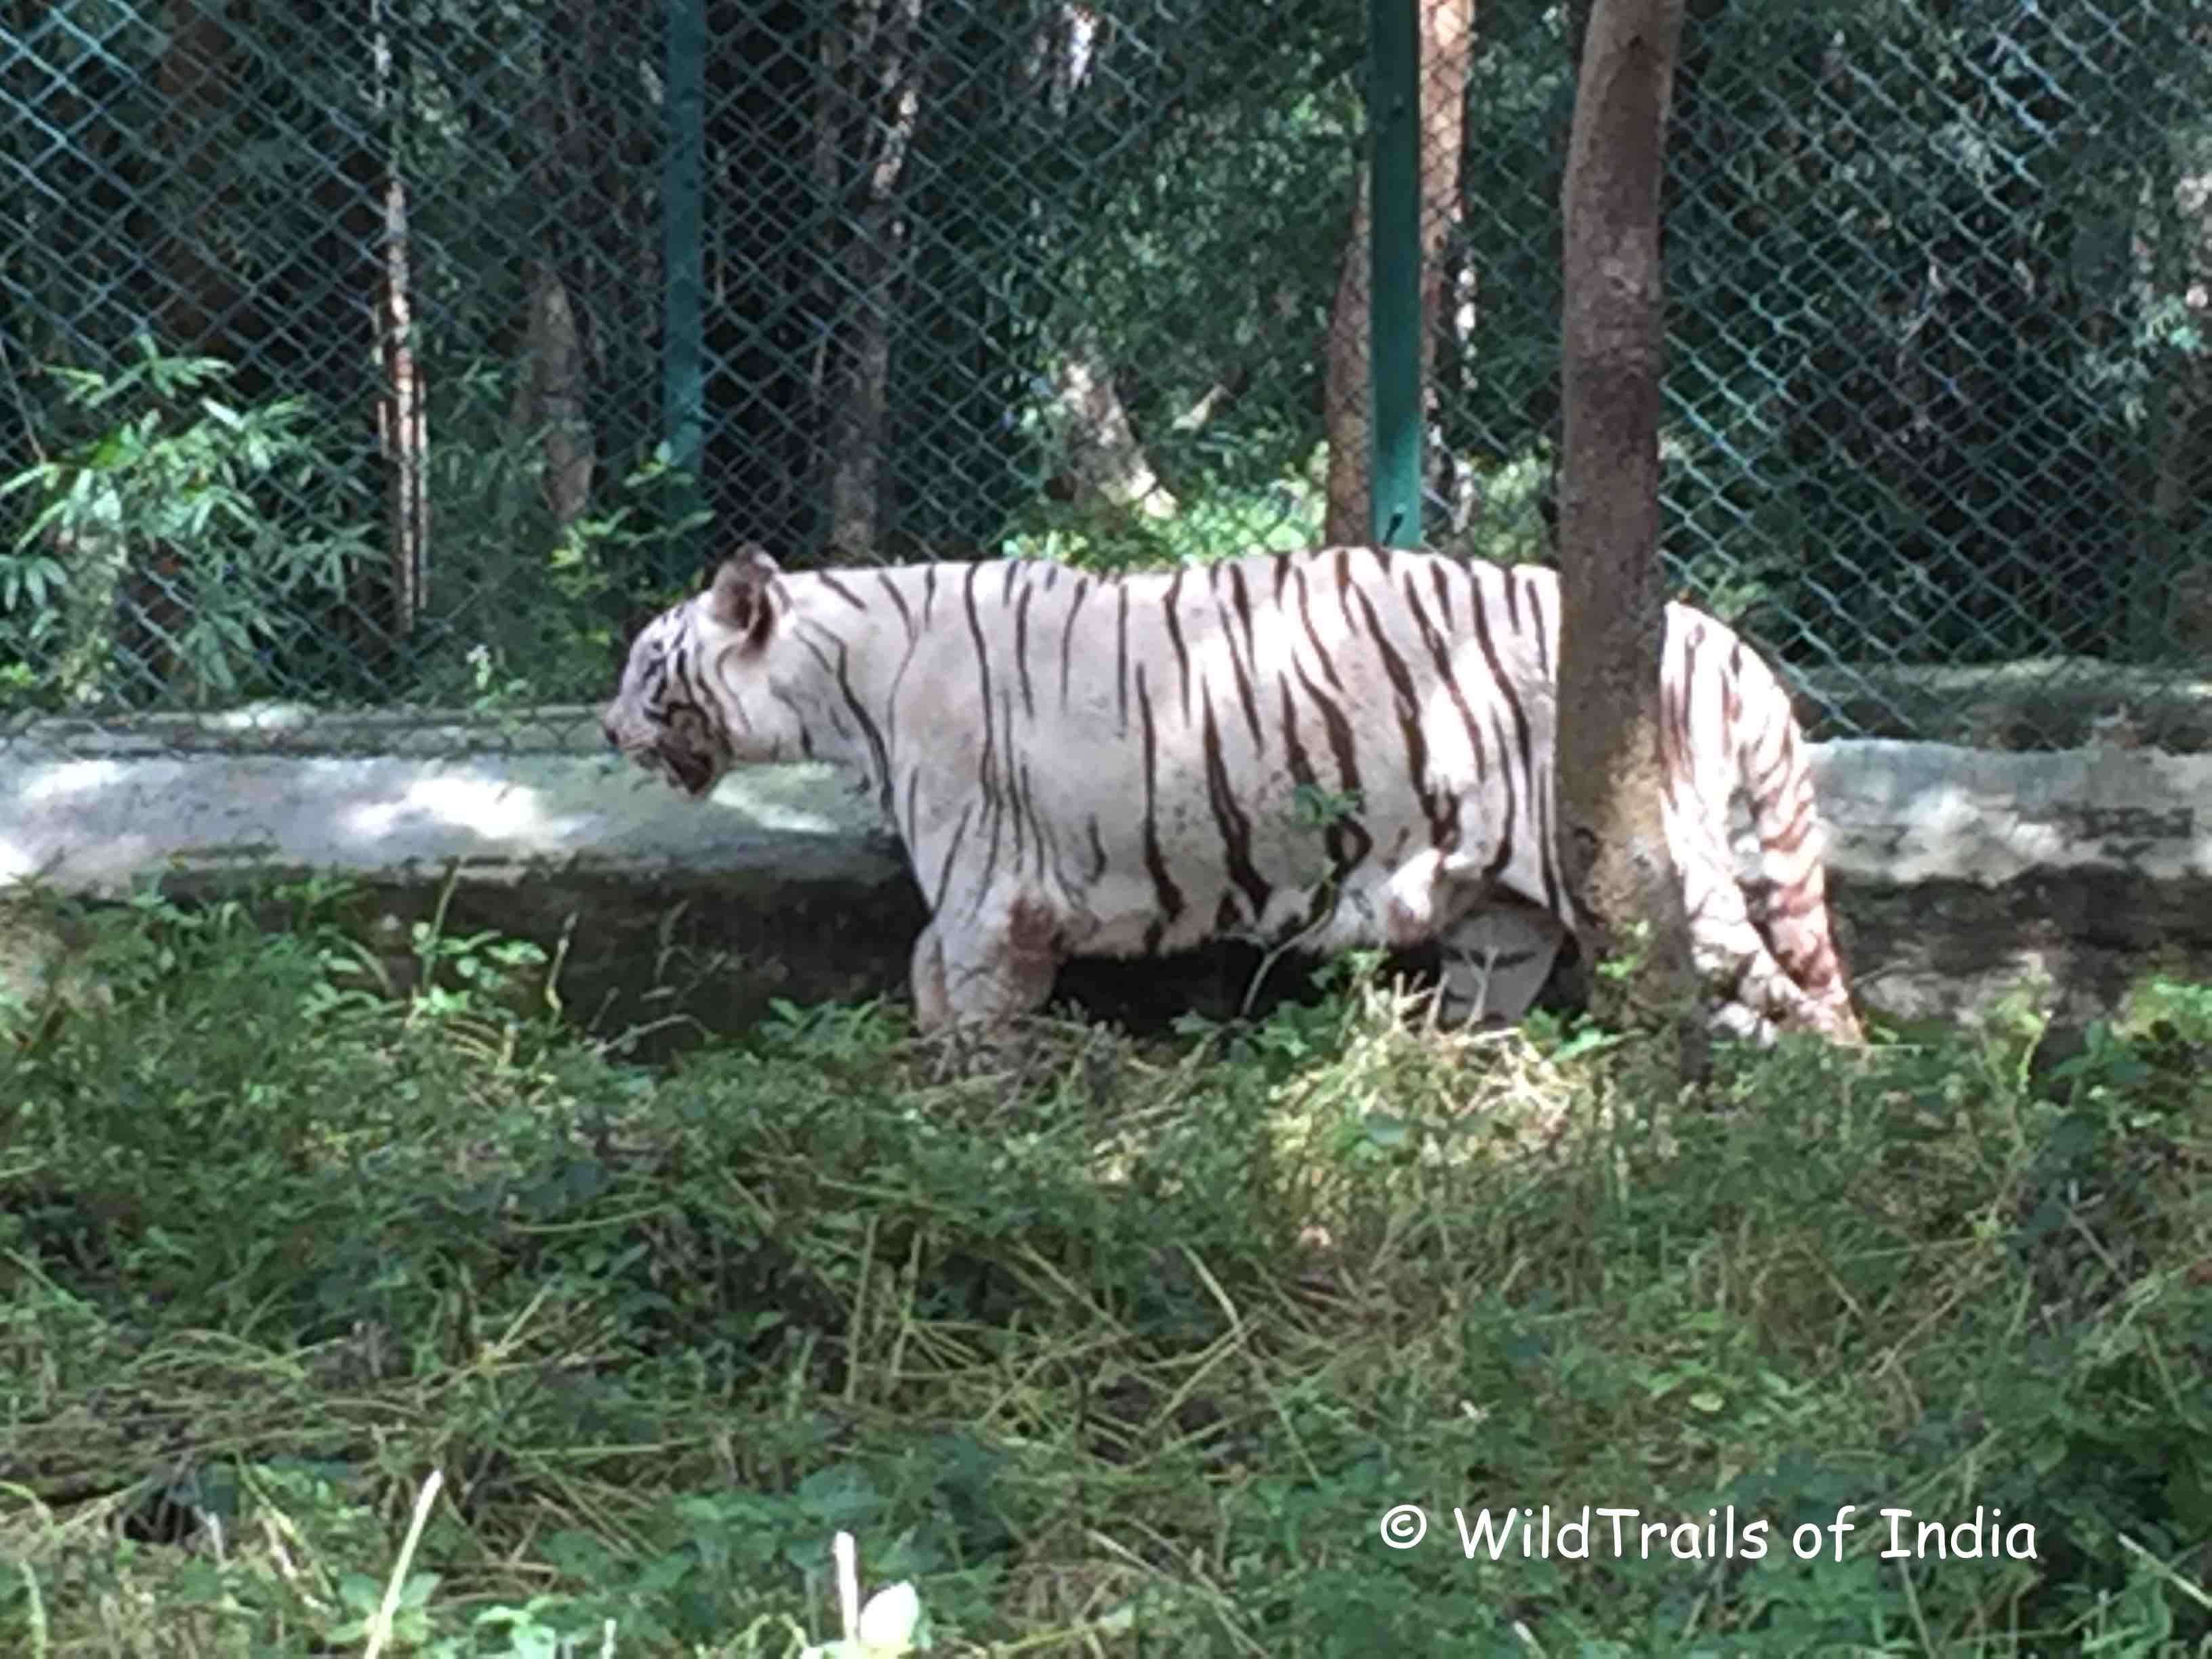 Bannerghatta Zoological Park; [The WildTrails of India is the best way to get all the details about Indian wildlife sanctuaries (best travel times, safari details, animal sightings, forest accommodations pairing, wildlife related activities, prices, etc). Learn more about WildTrails of India here. ios App is here. Android and Web is on the way ]